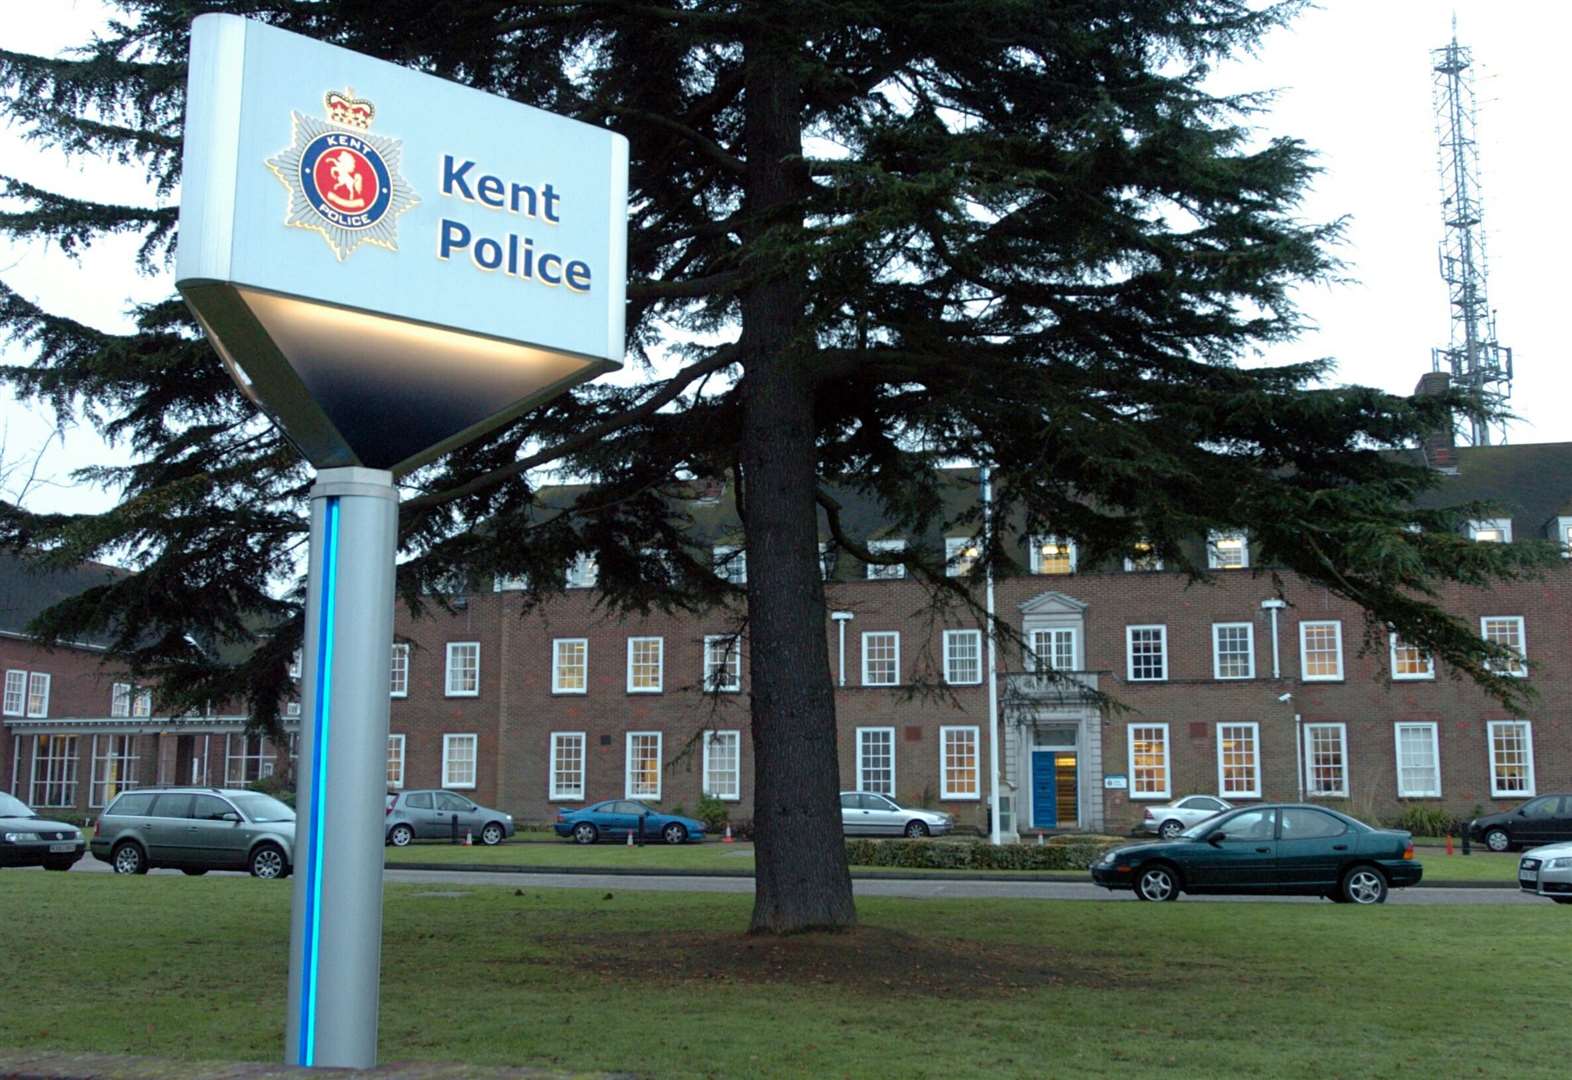 Kent Police to sell playing field for housing 